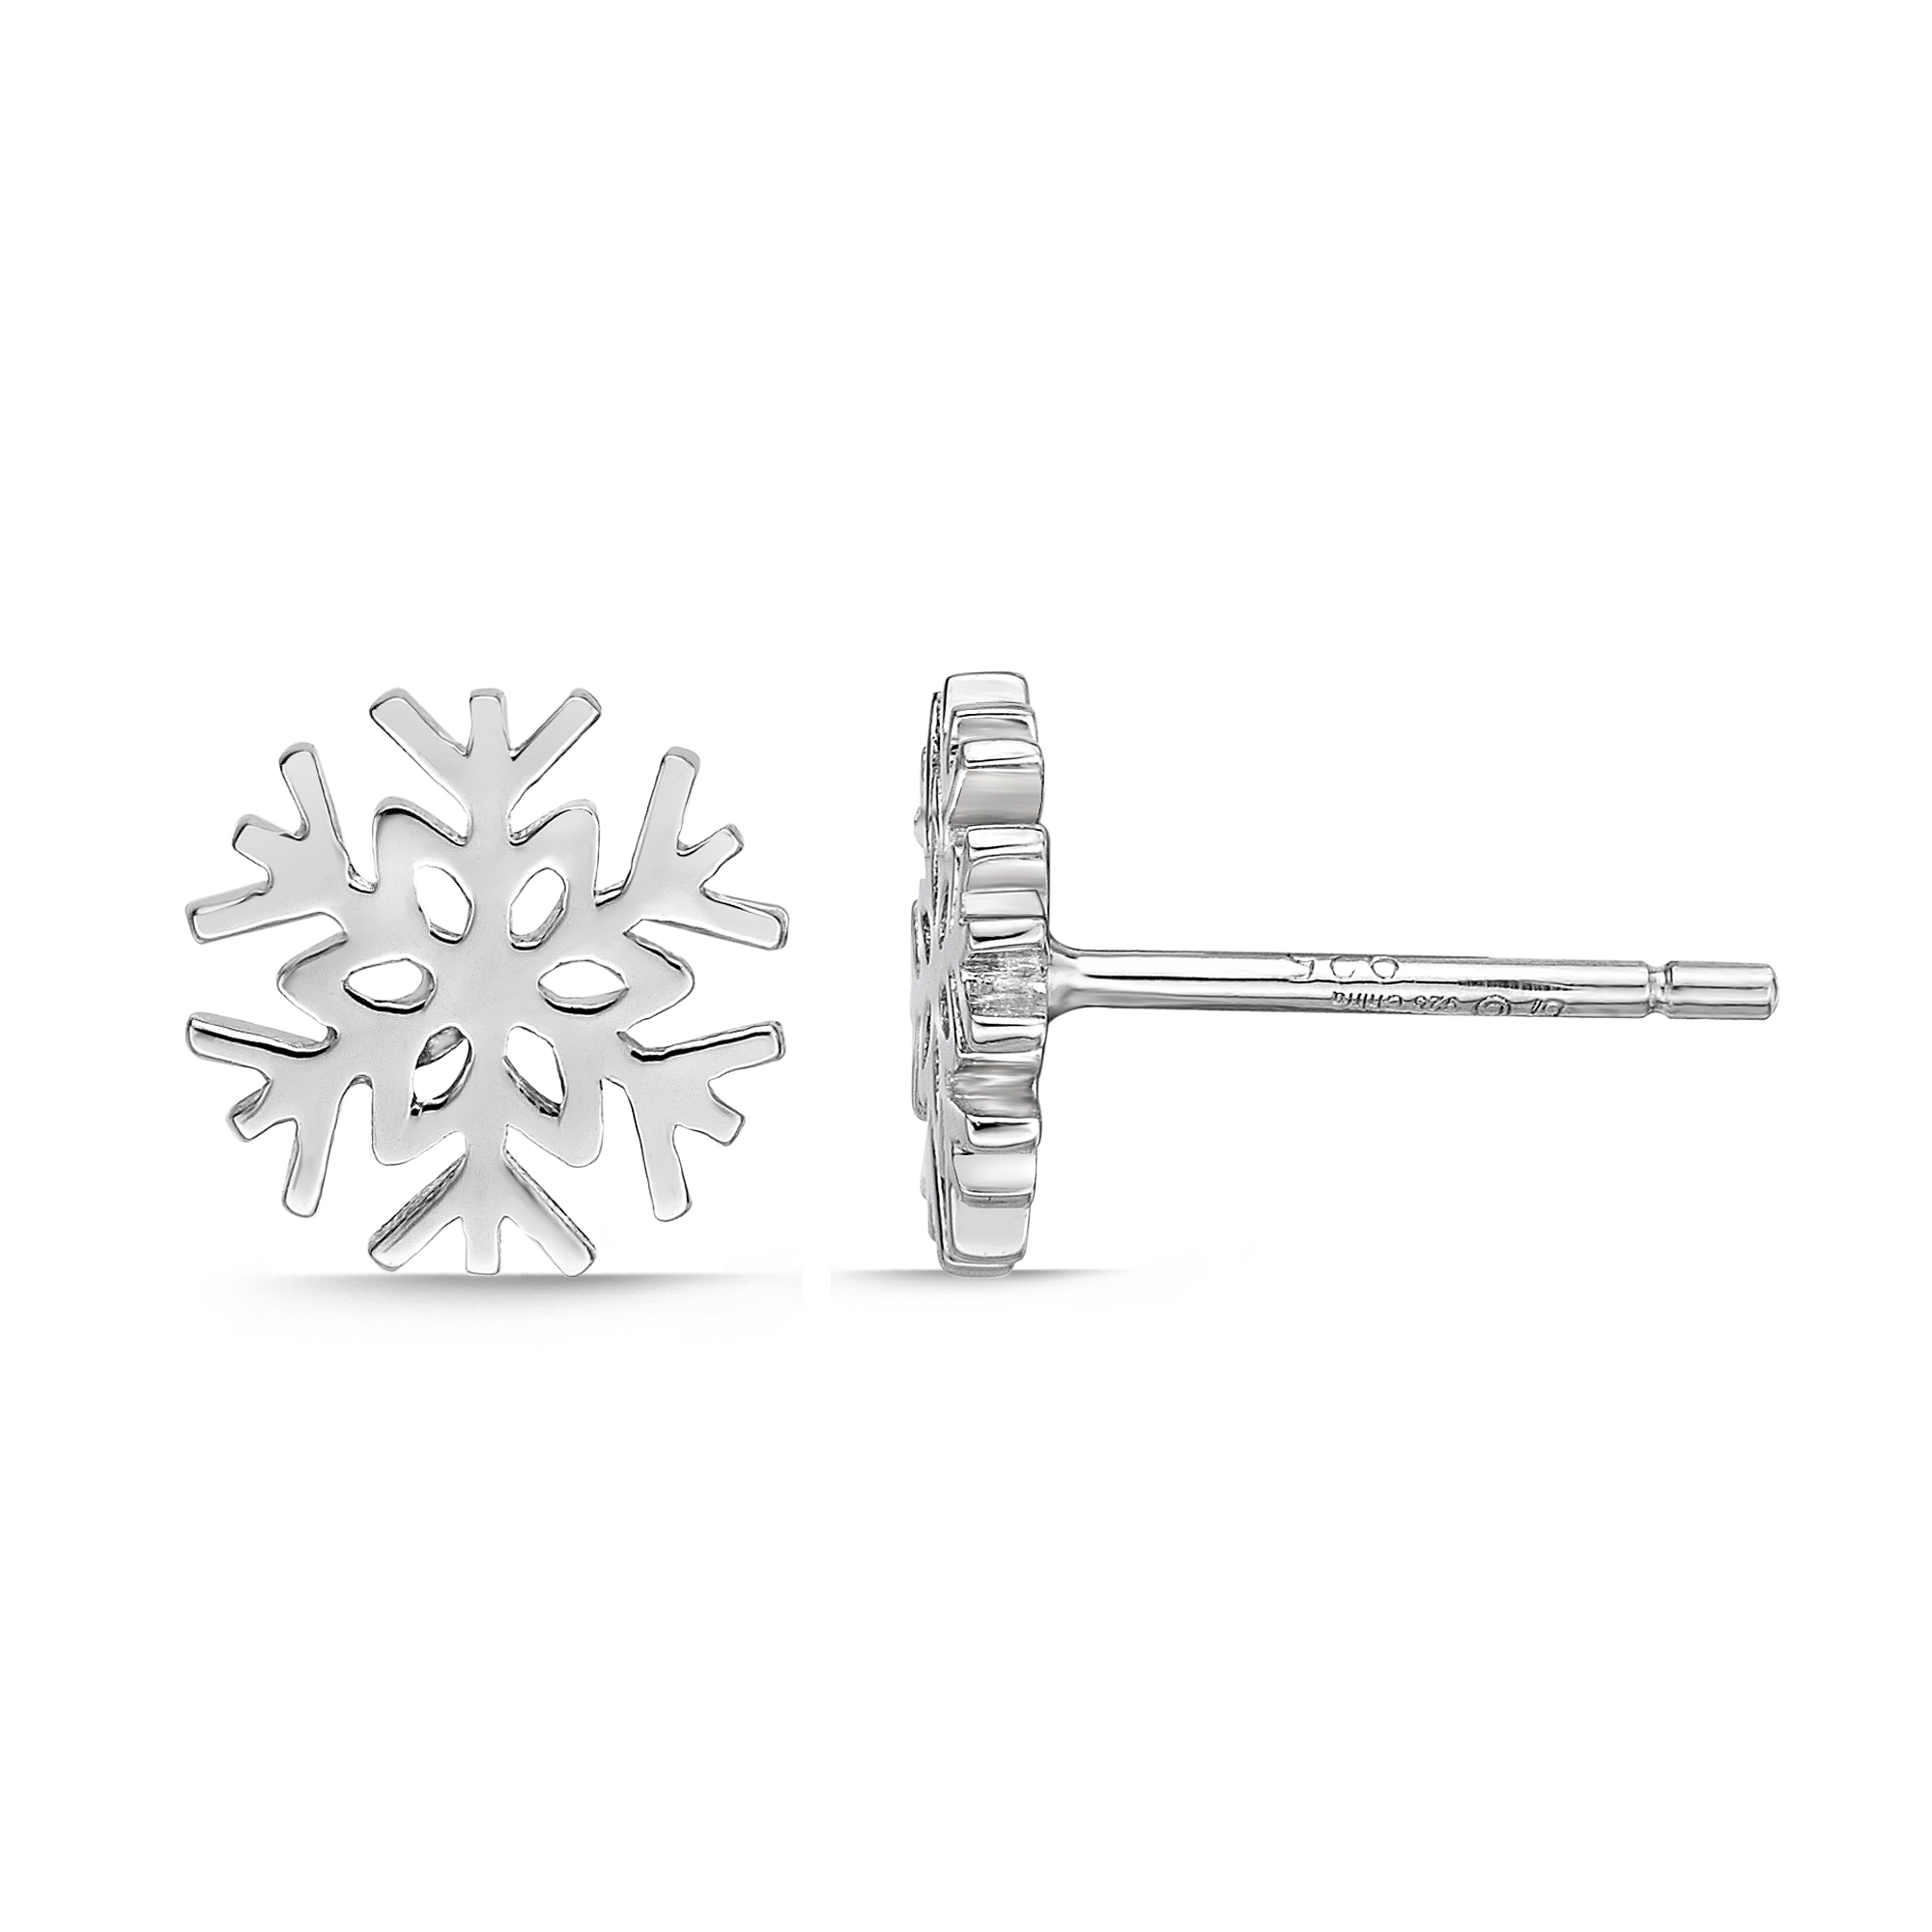 Lavari Jewelers Women's Snowflake Stud Earrings with Friction Post Back, 925 Sterling Silver, Cubic Zirconia, 8 MM